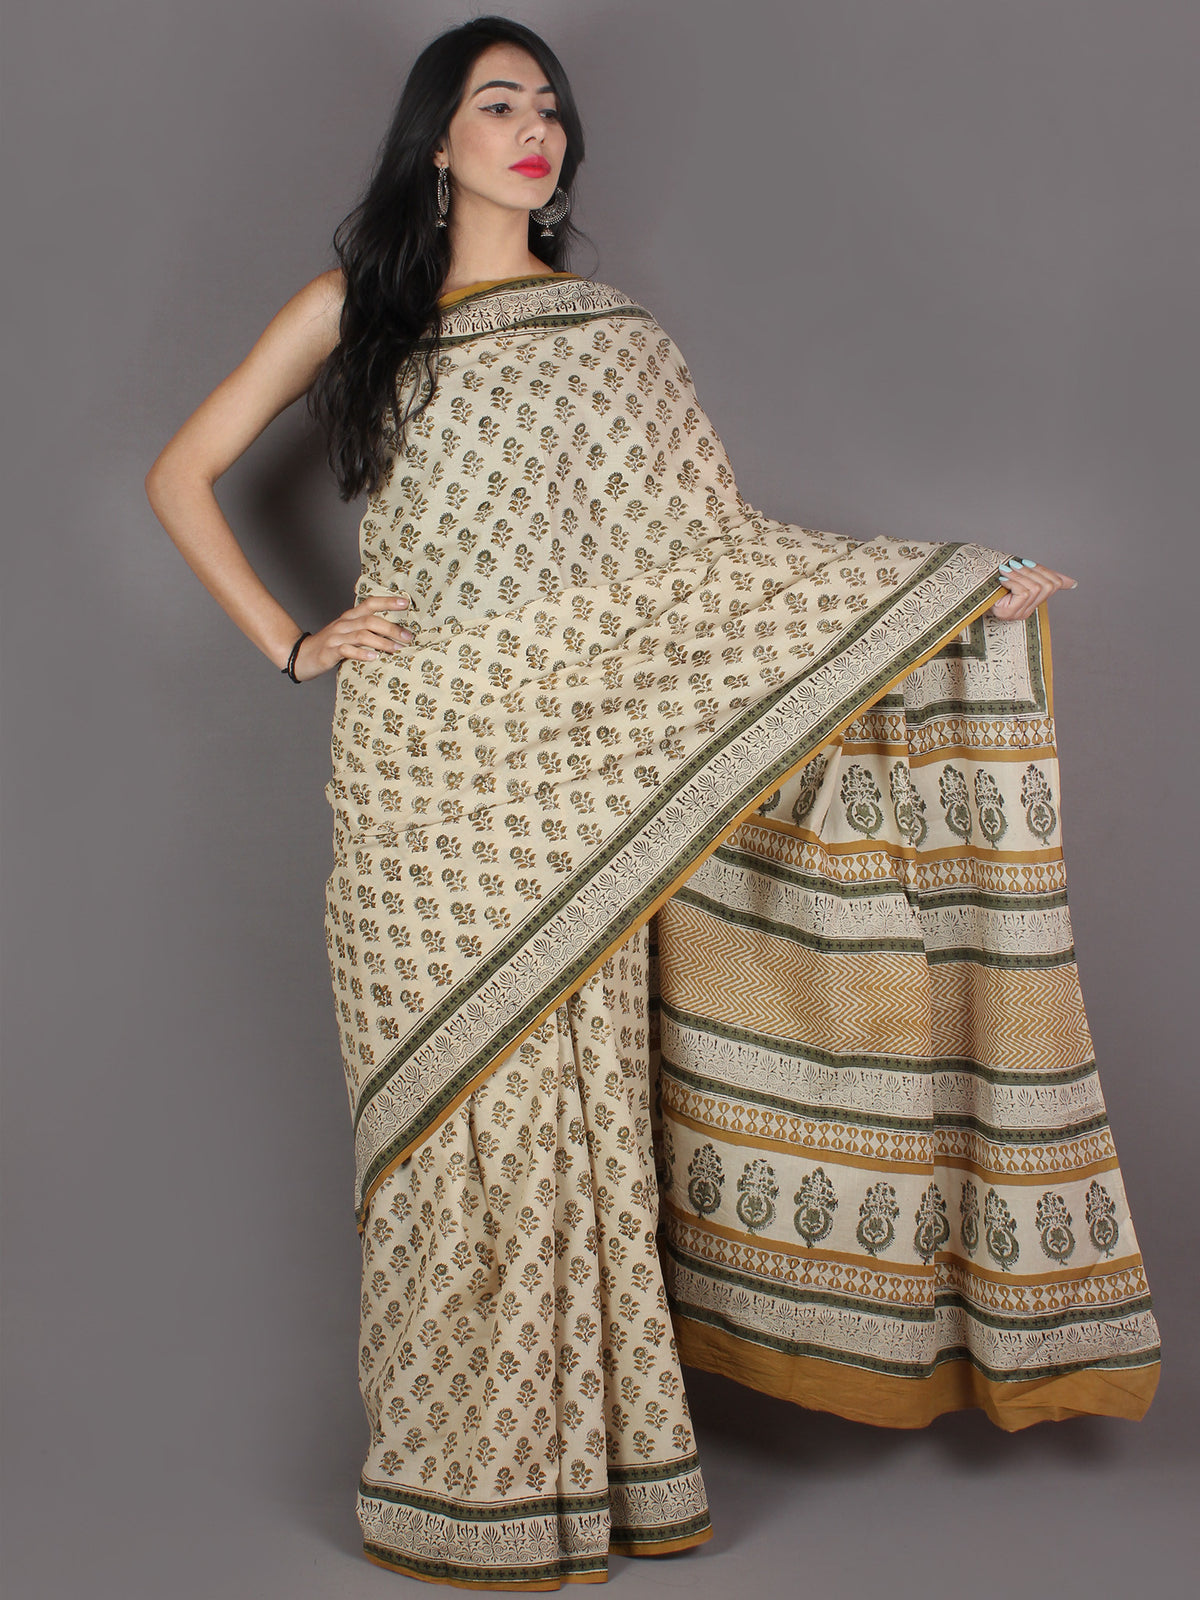 Ivory Green Yellow Black Hand Block Printed in Natural Colors Cotton Mul Saree - S03170962